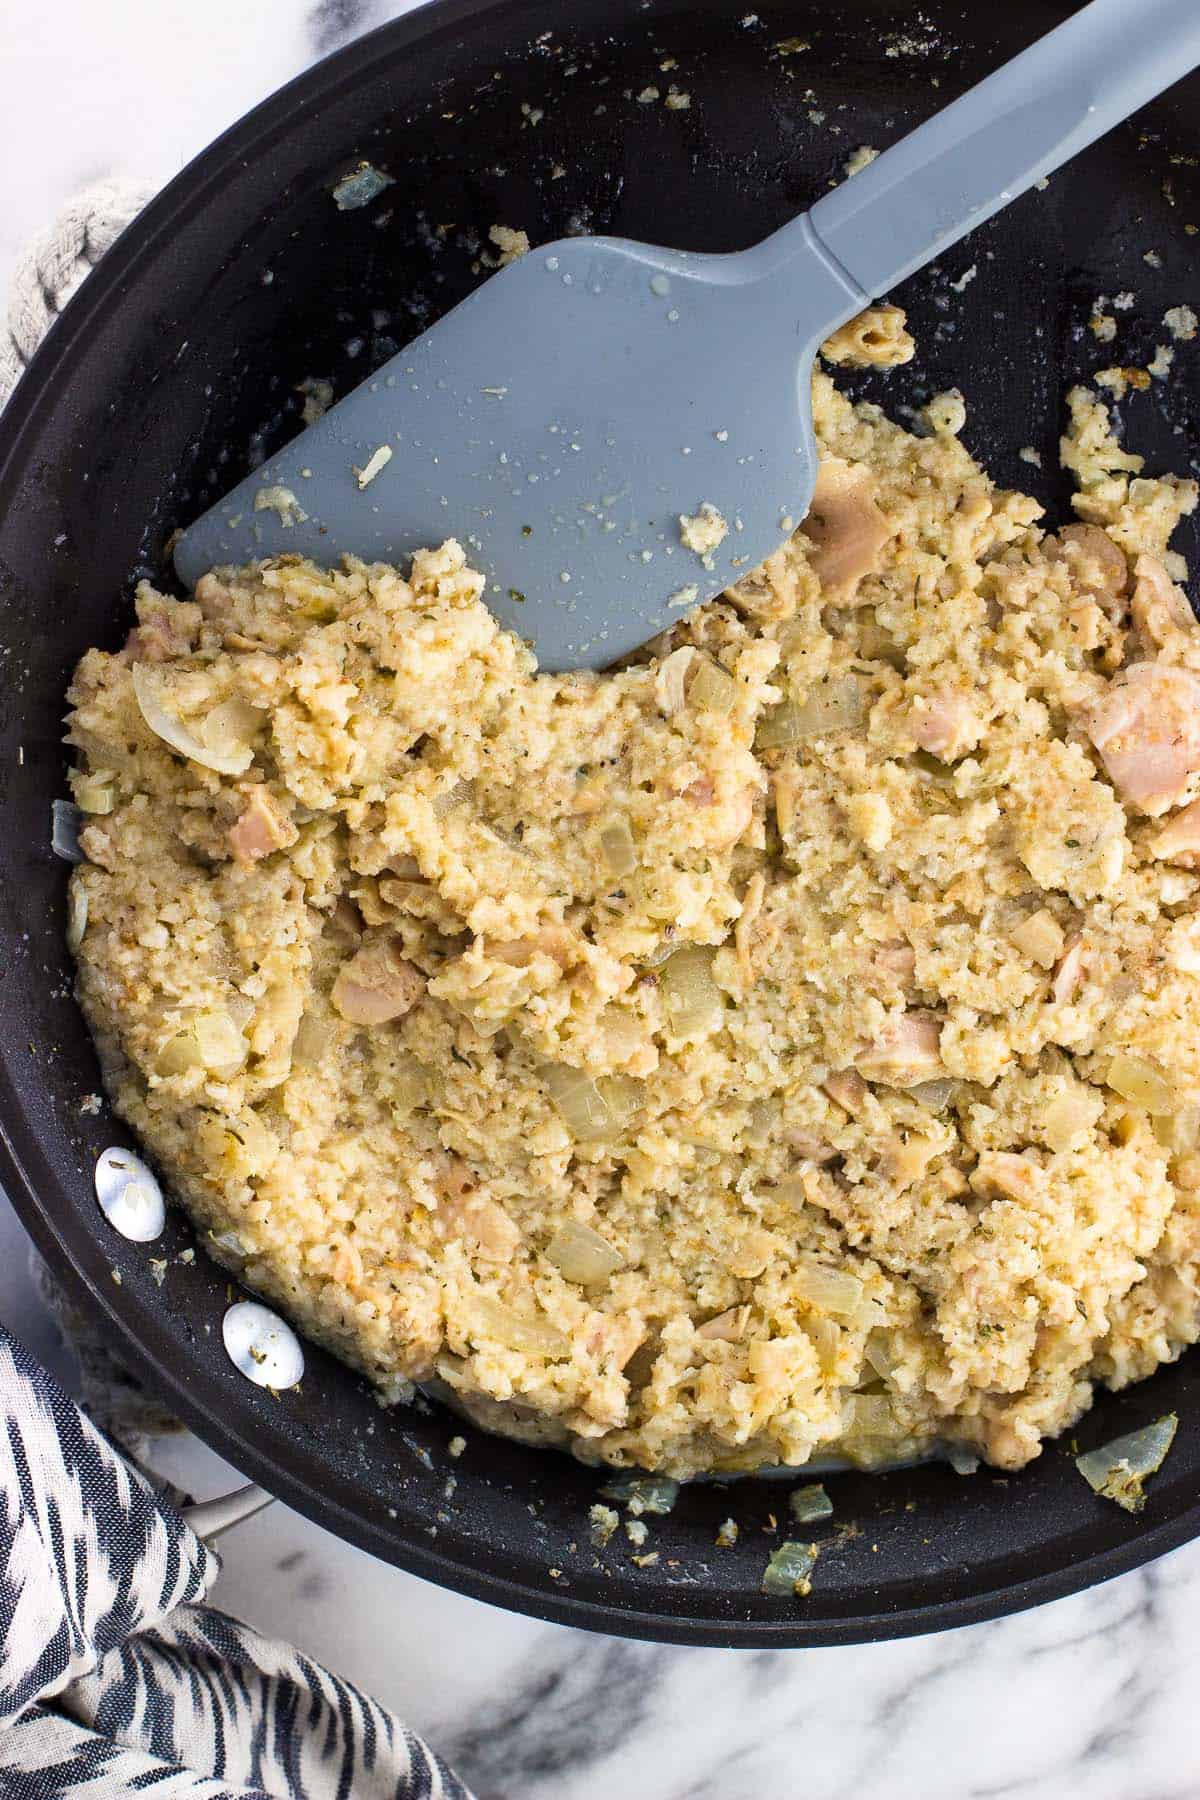 Clam dip mixture in a skillet with a spatula before baking